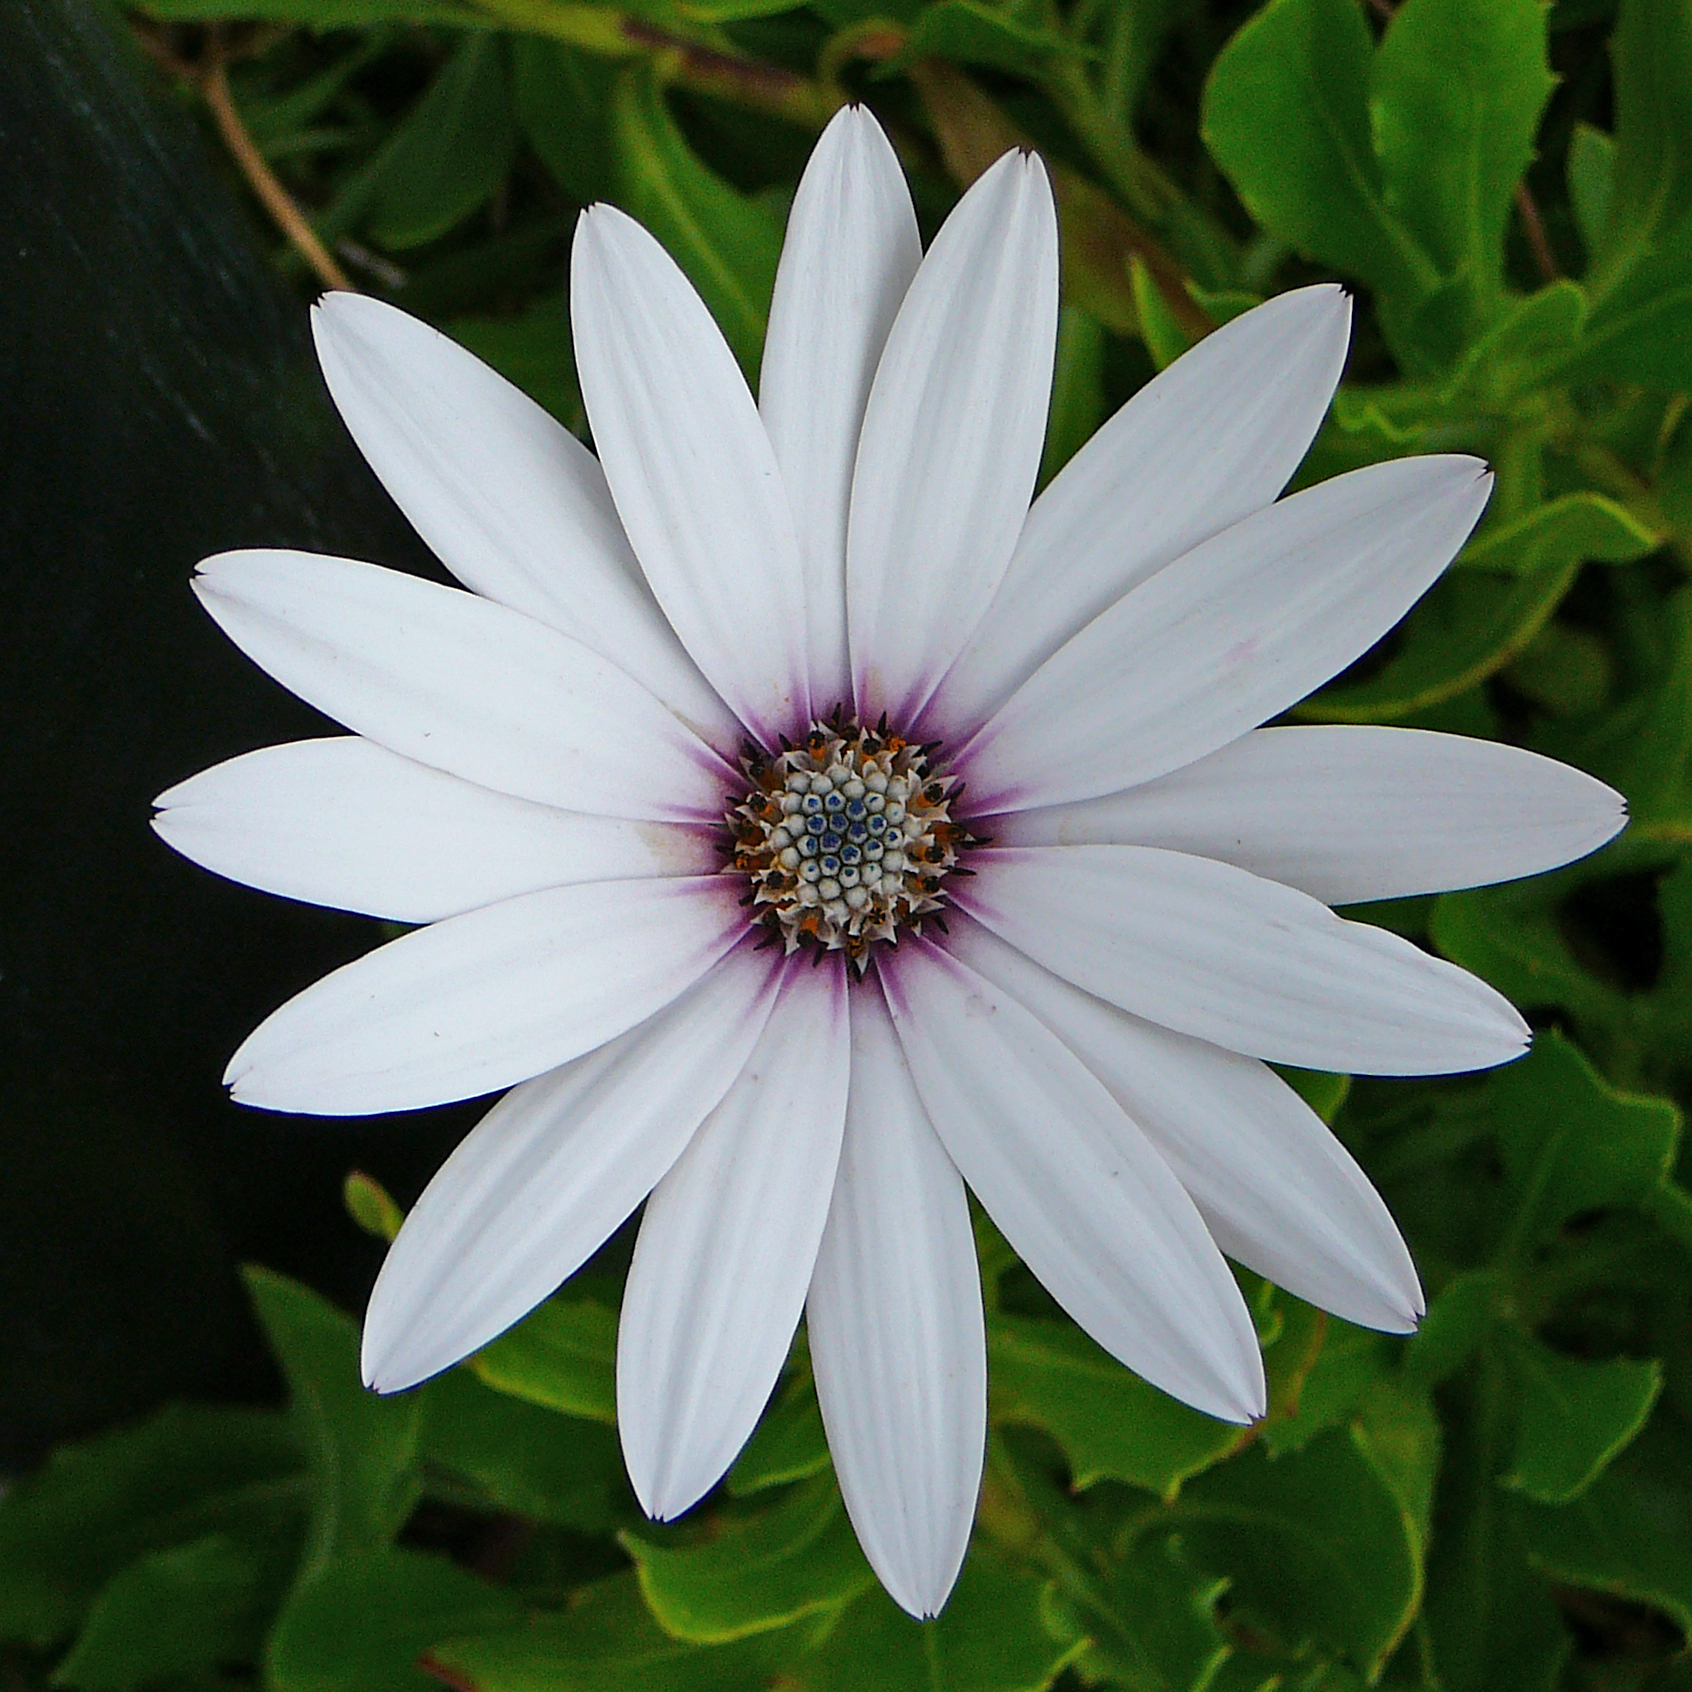 a flower with very large petals near green leaves